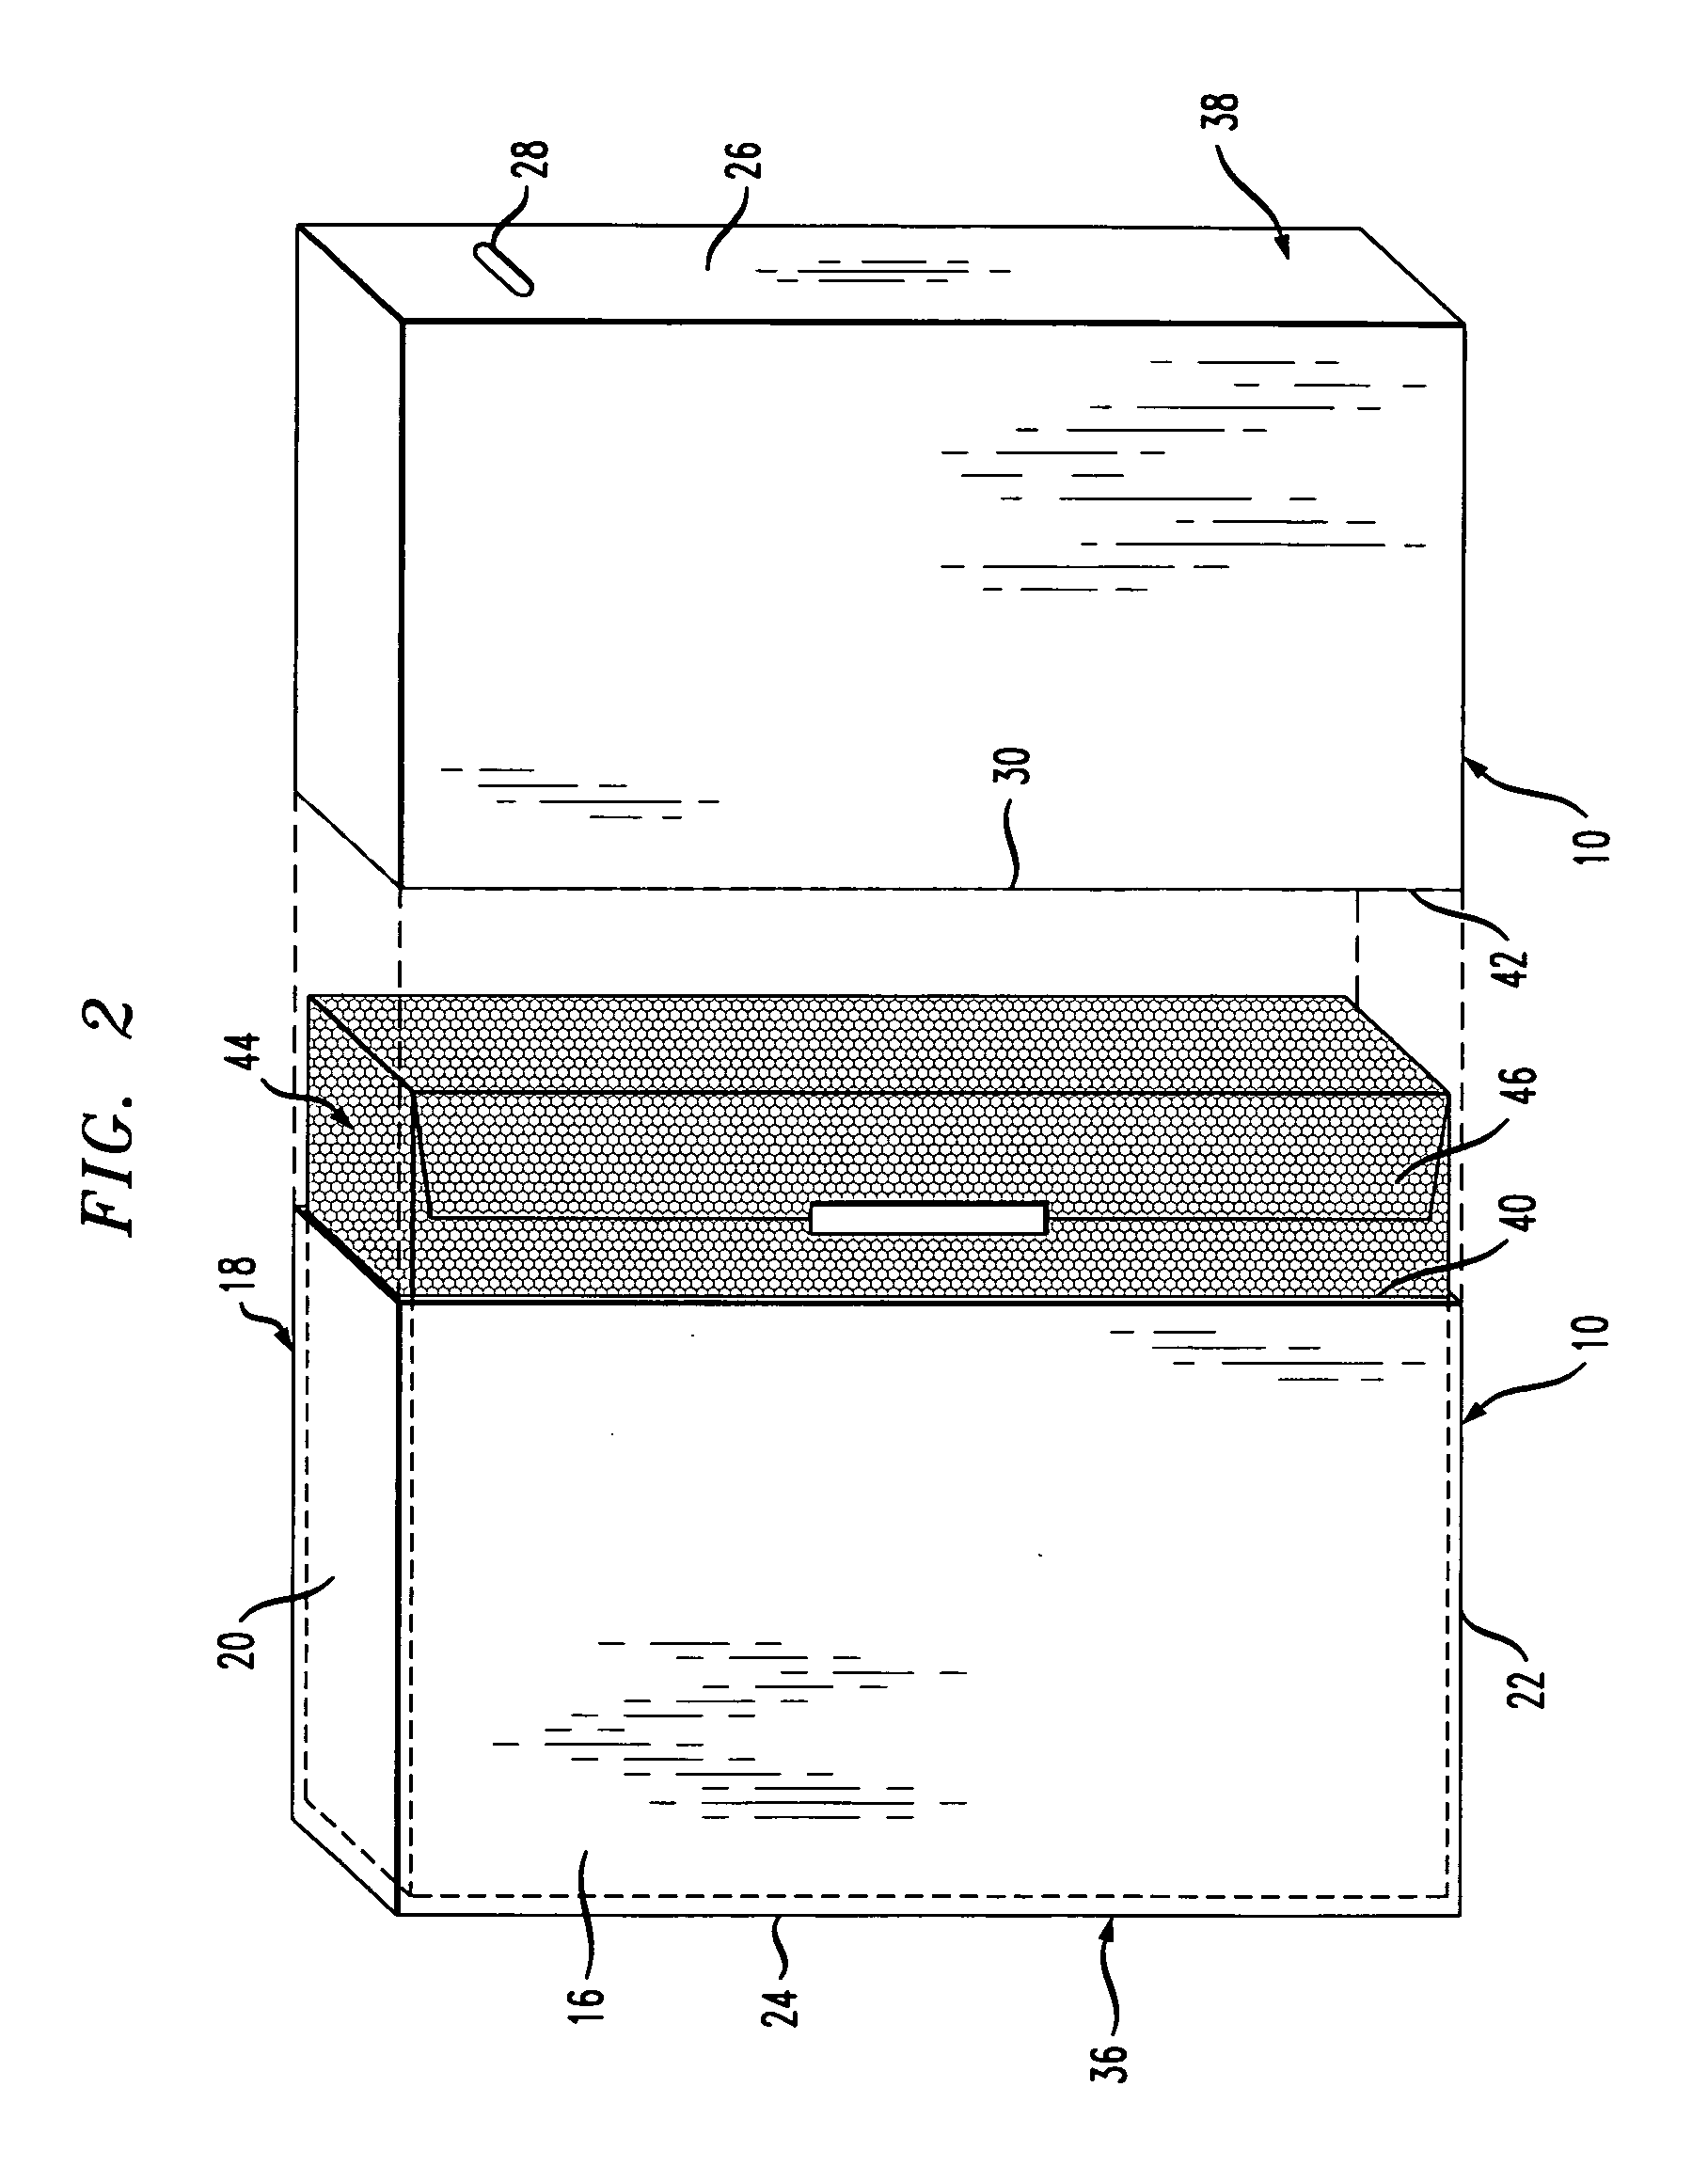 Packaging system for carrying an item, preferably bulky and/or heavy items, and method for using the same